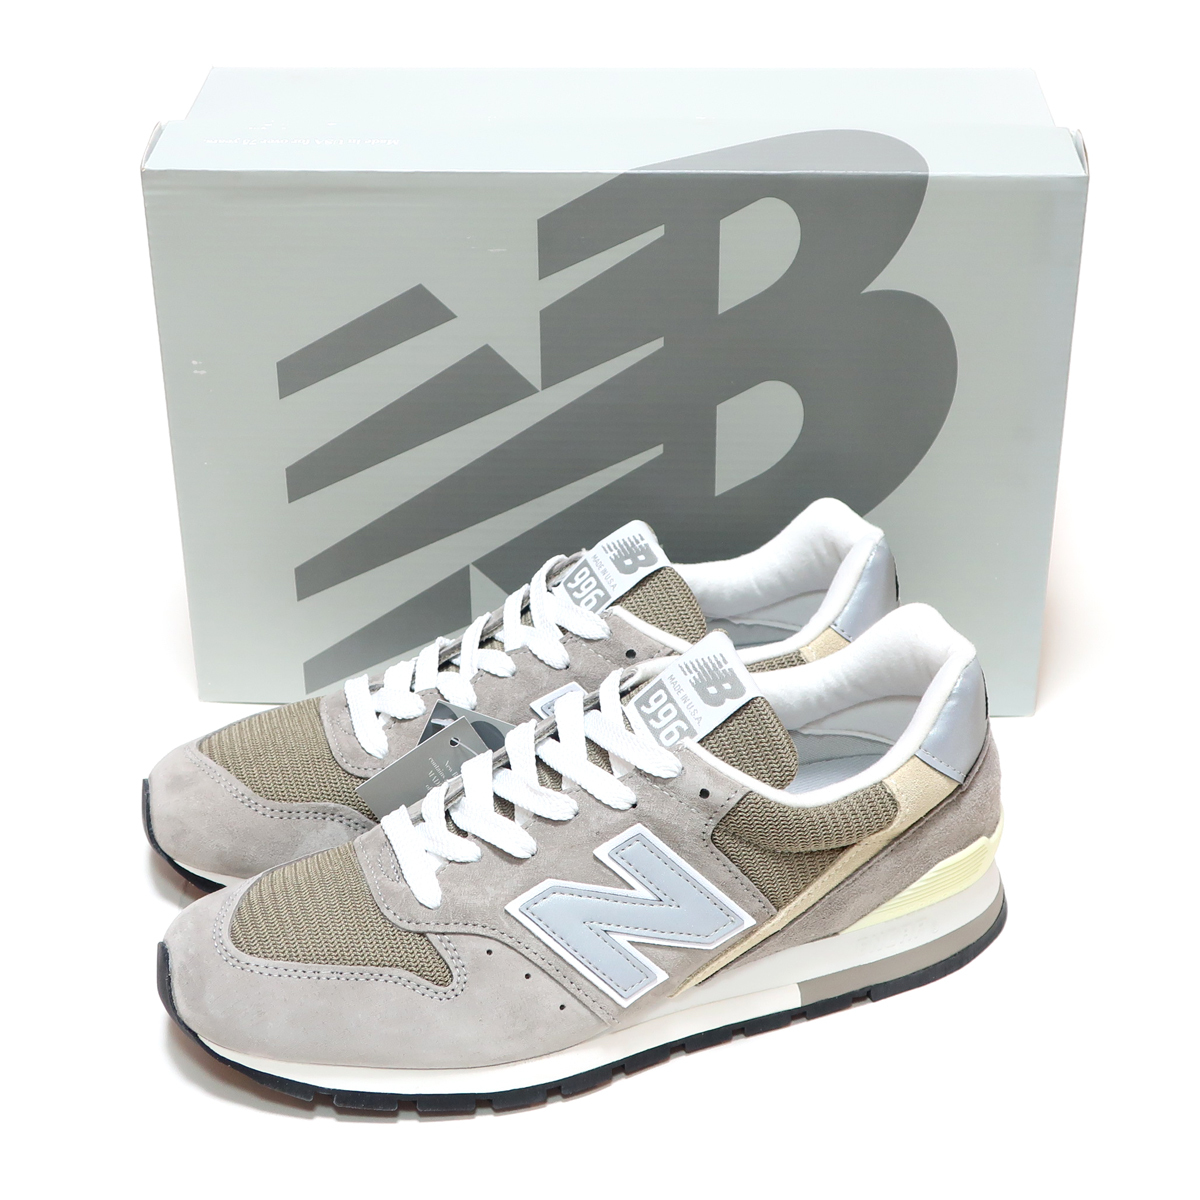 NEW BALANCE U996GR GRAY GREY SUEDE MADE IN USA US8.5 26.5cm ( ニューバランス 996 グレー スエード アメリカ製 )